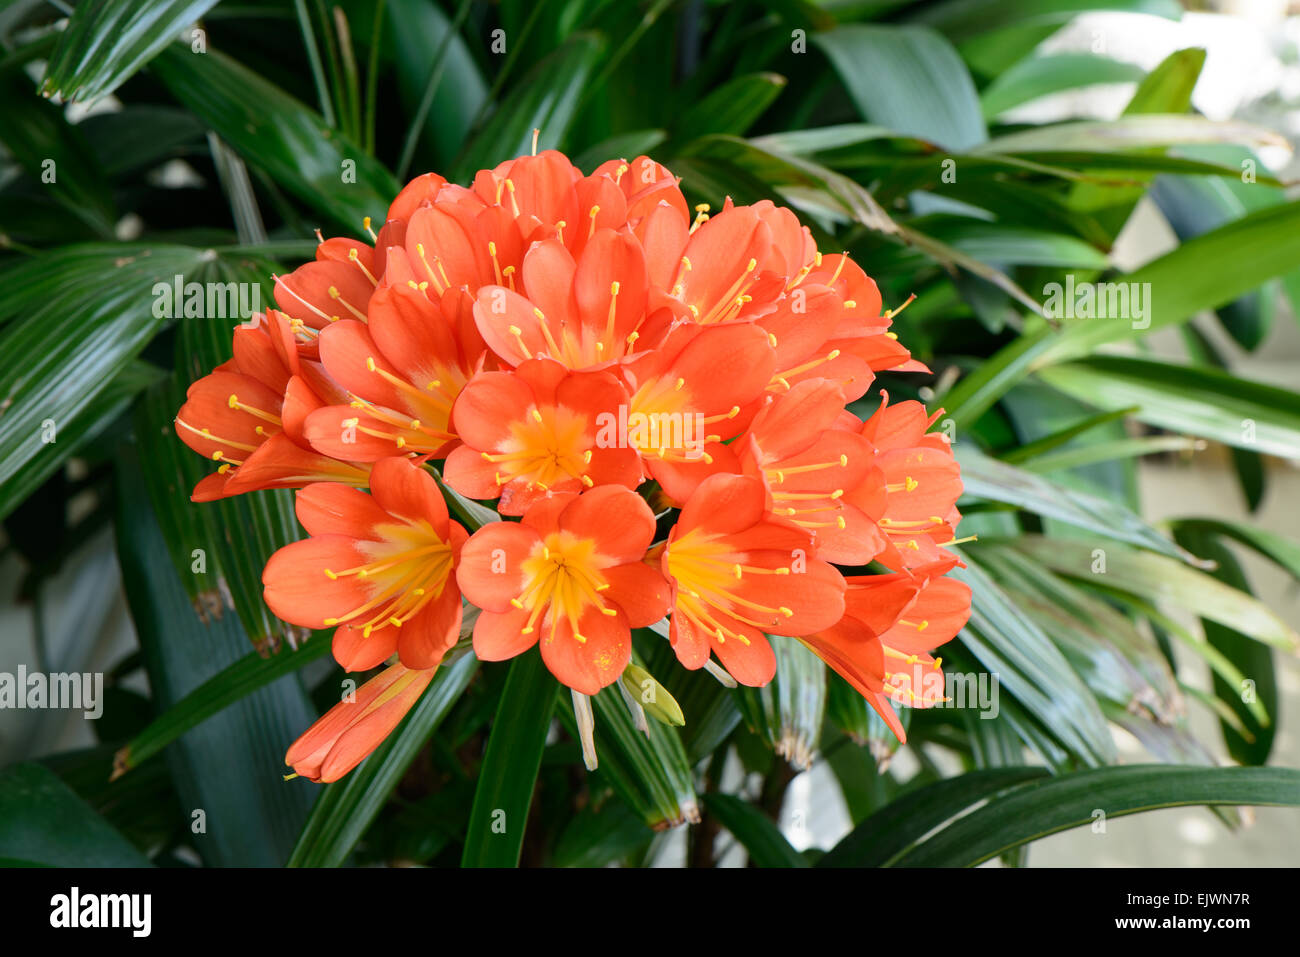 Closeup of clivia miniata flowers in full bloom. It sometimes called as Natal lily, Bush Iliy, Kaffir lily. Stock Photo